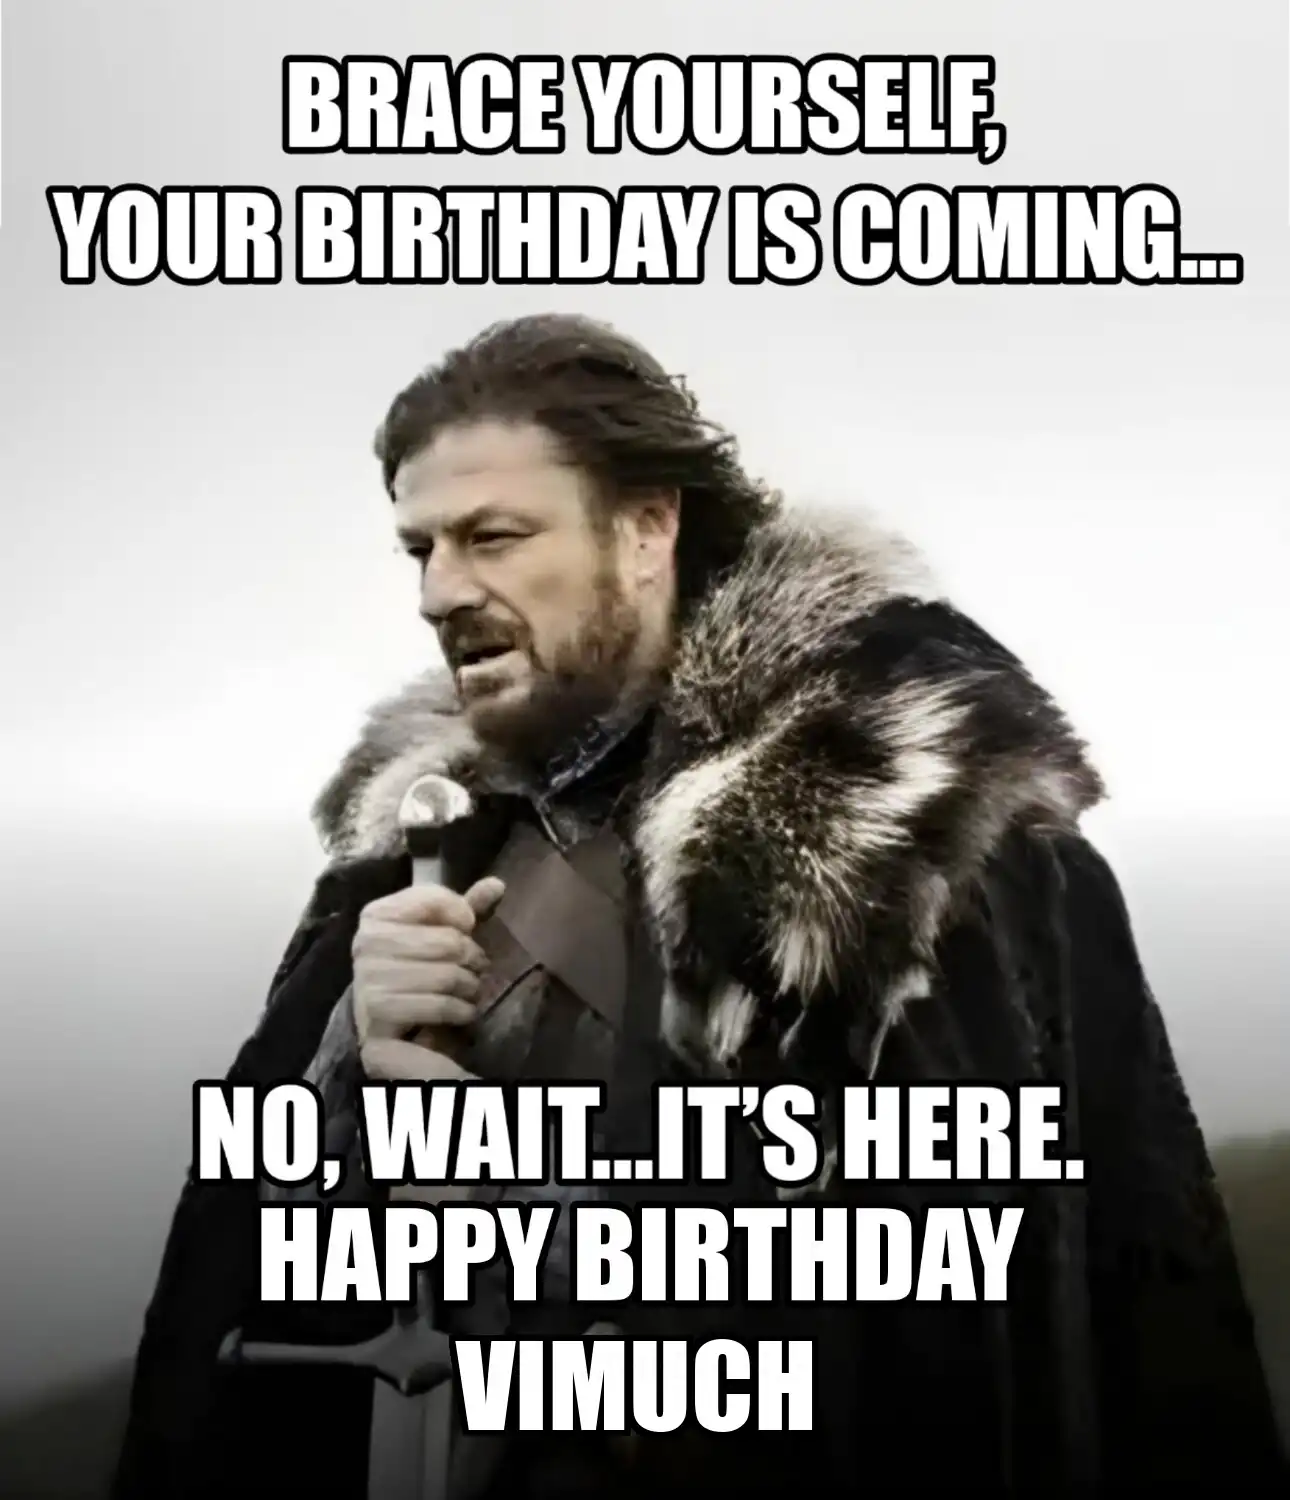 Happy Birthday Vimuch Brace Yourself Your Birthday Is Coming Meme